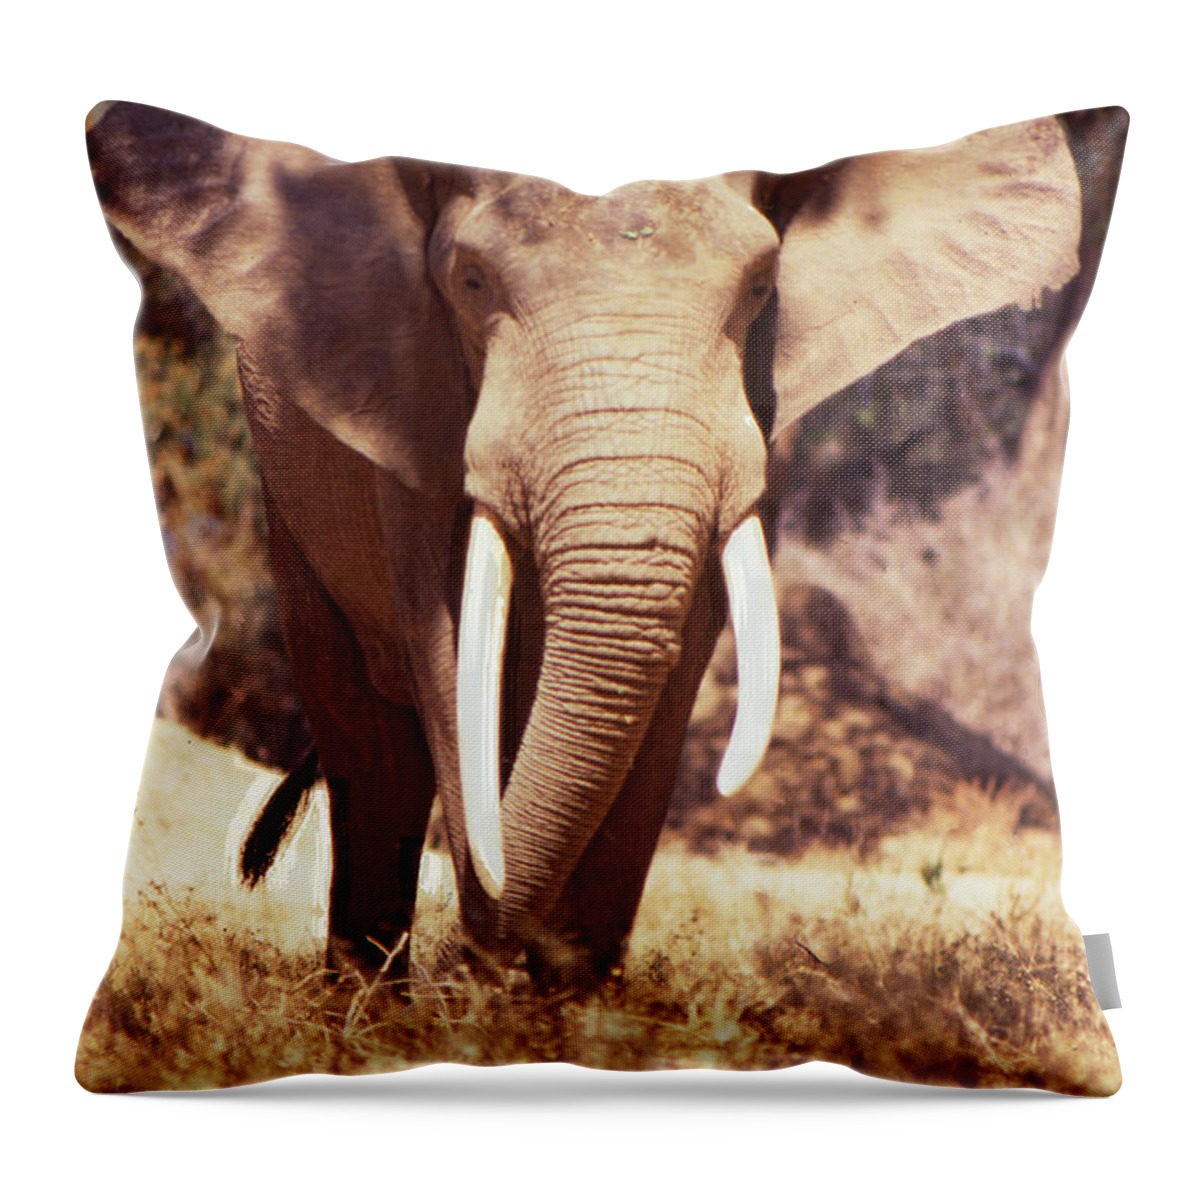 Mana Pools Throw Pillow featuring the photograph Mana Pools Elephant by Jeremy Hayden